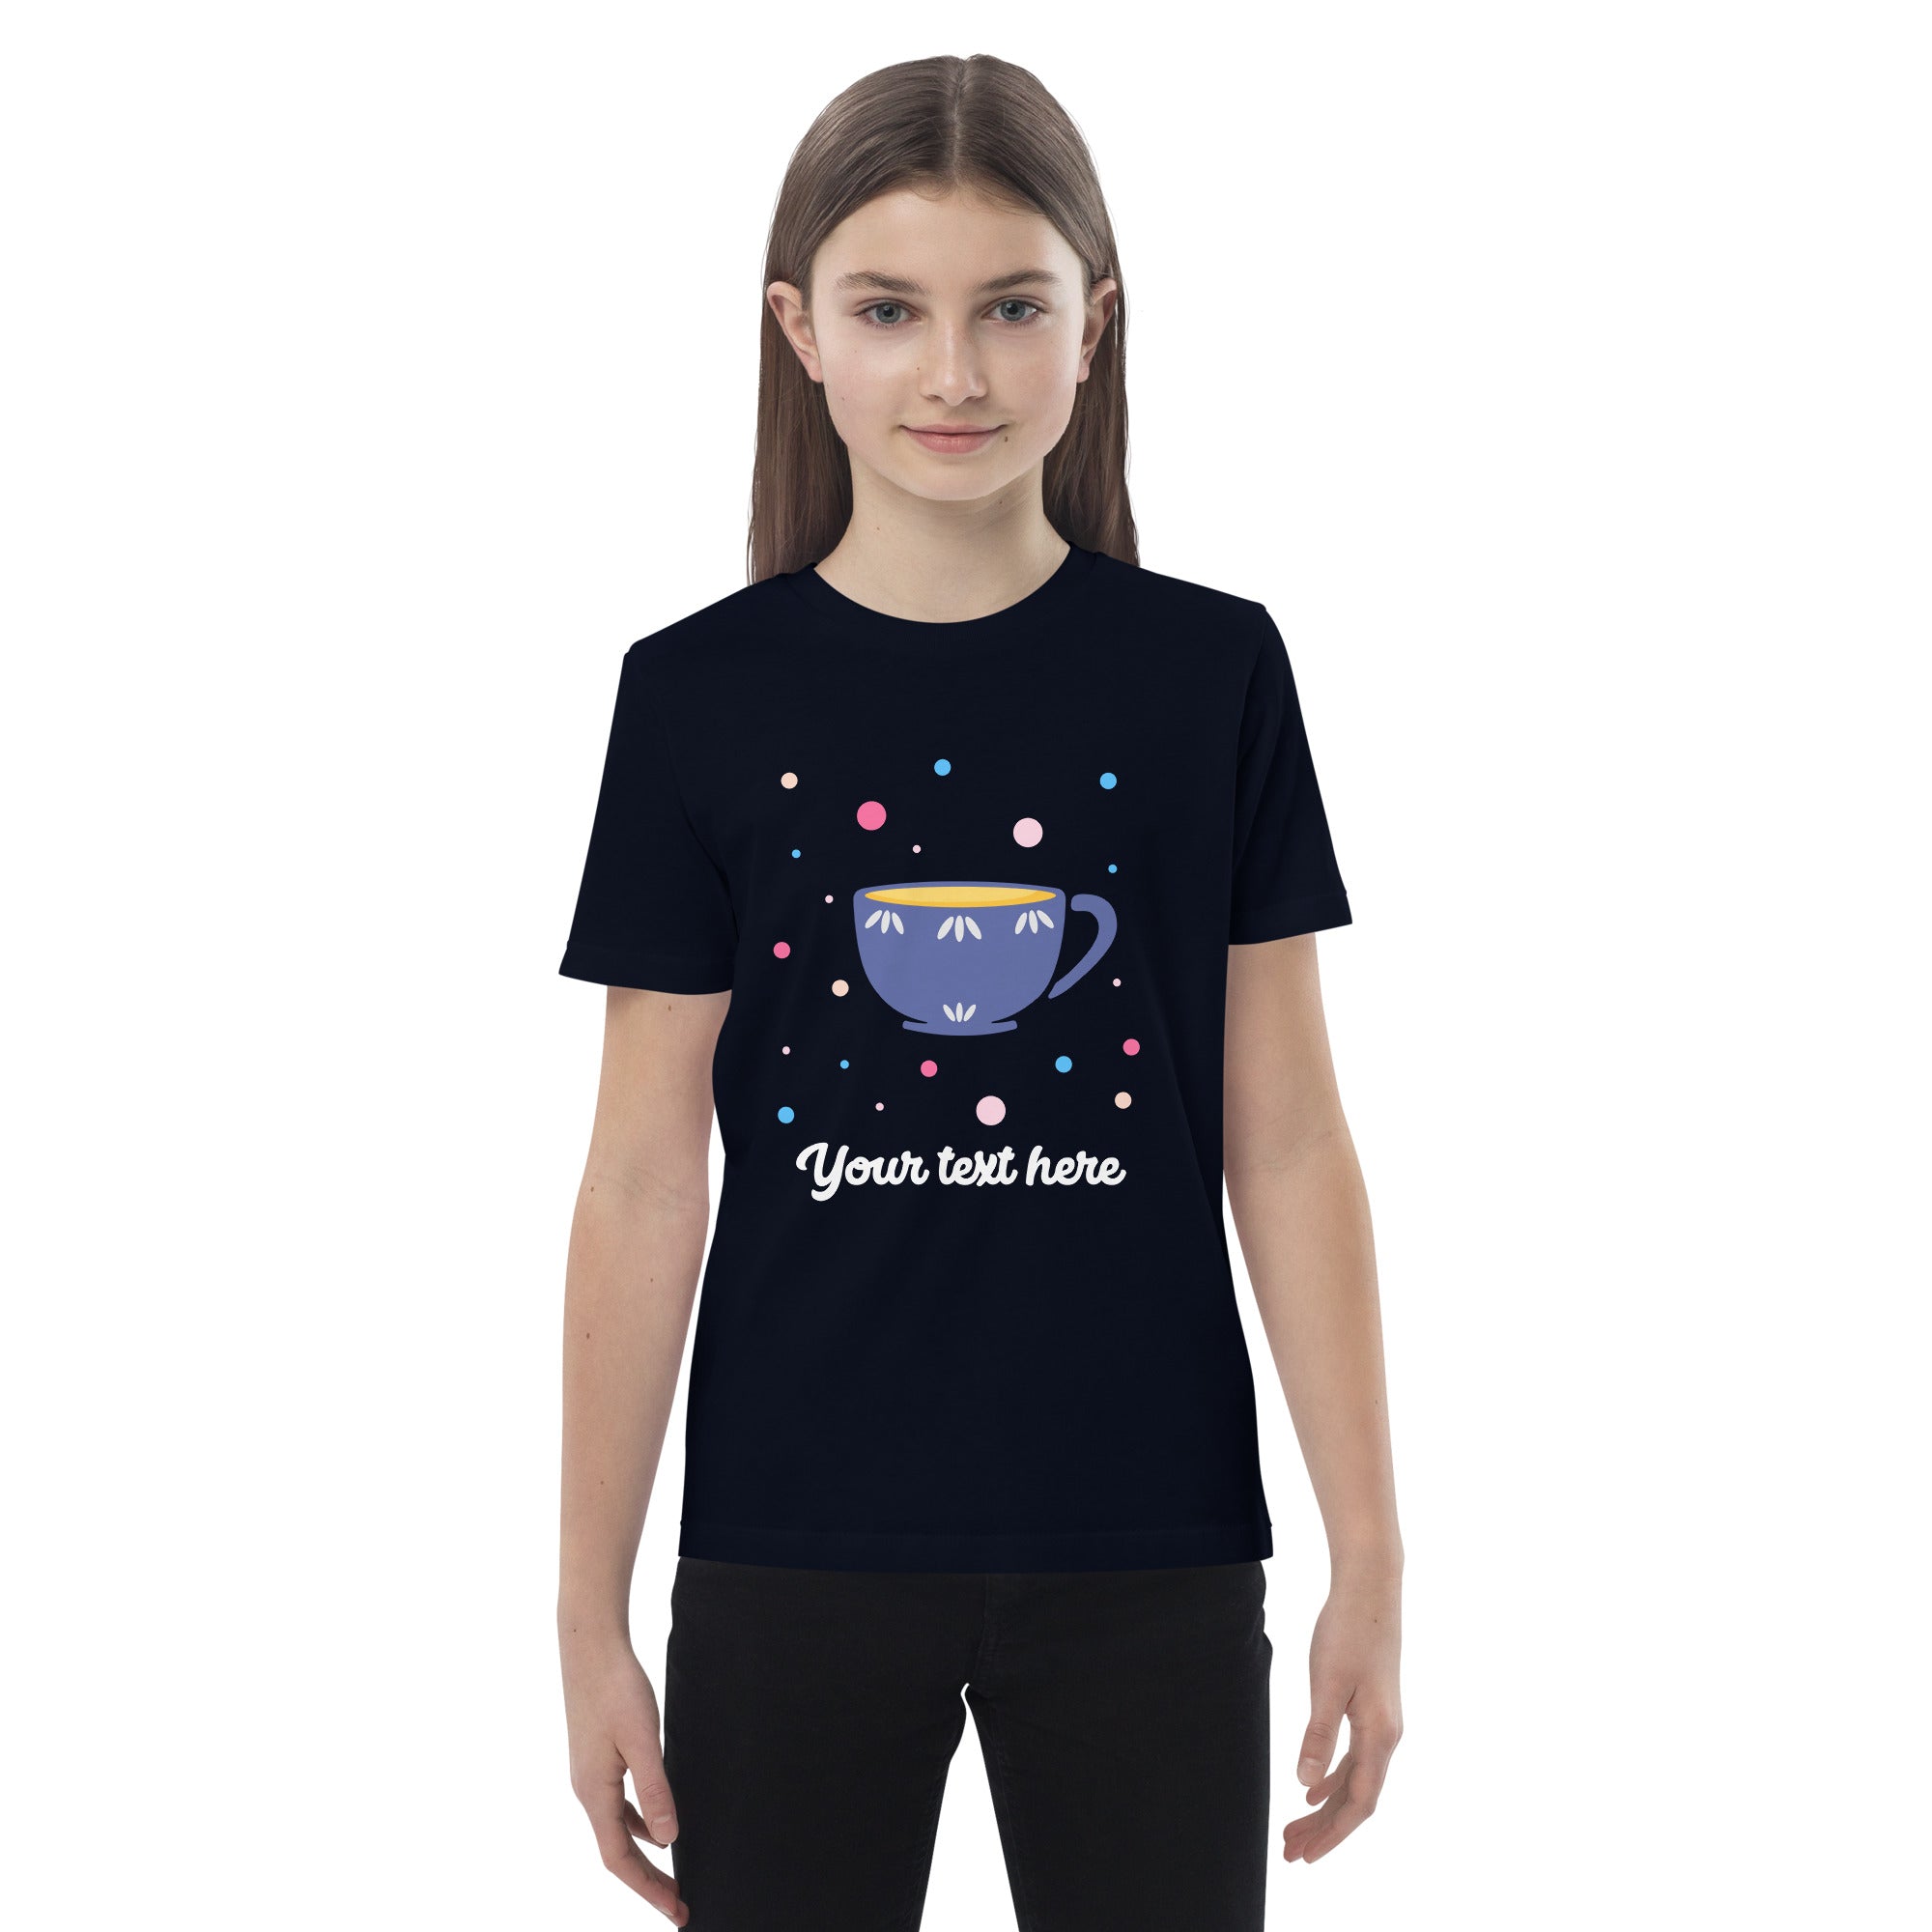 Personalised Custom Text - Organic Cotton Kids T-Shirt - London Doodles - Cup Of Tea - Navy 3